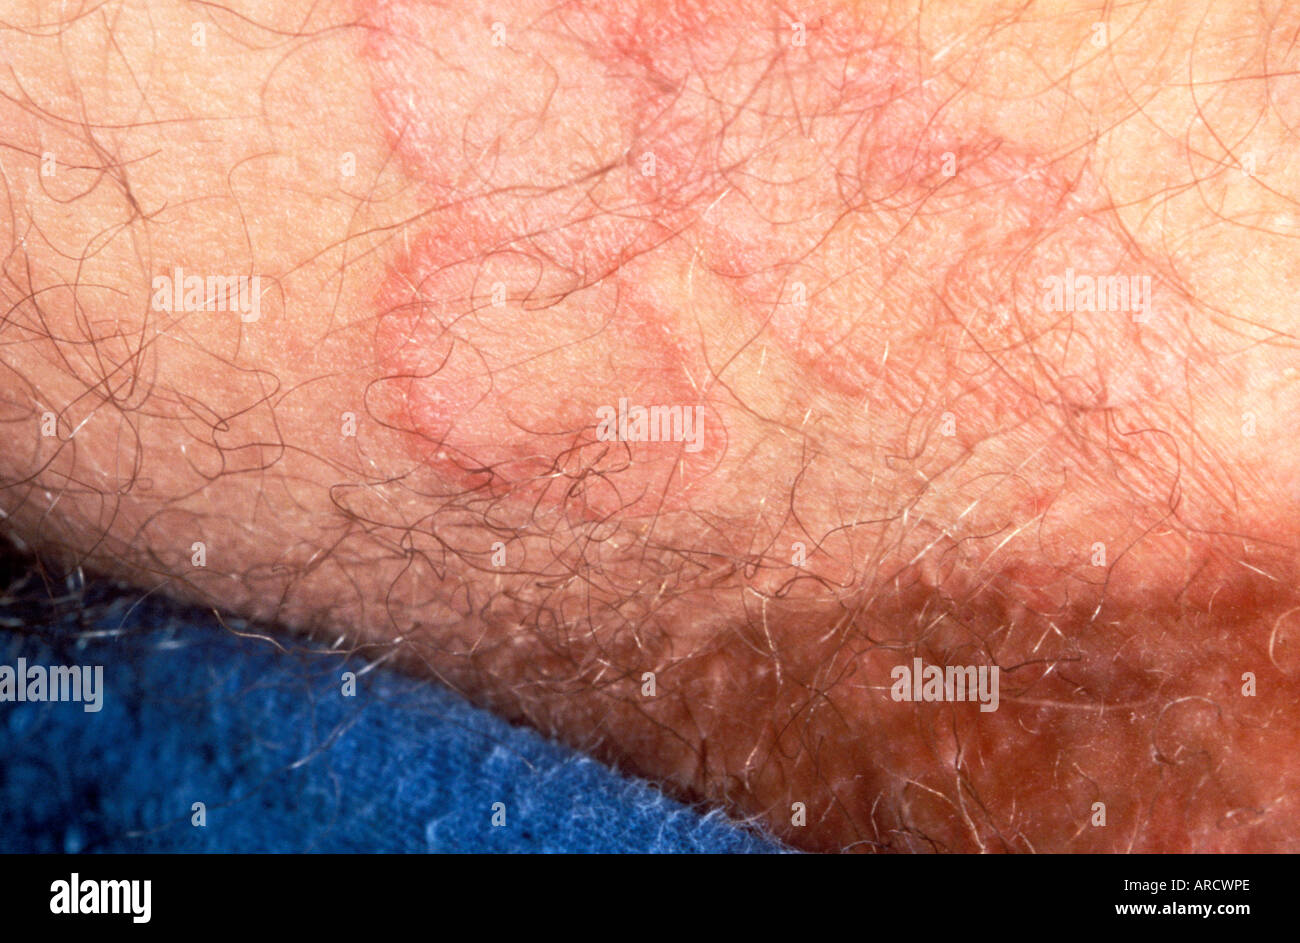 Contrary to its name, ringworm is not caused by a worm. Ringworm is a skin infection caused by a fungus. Stock Photo